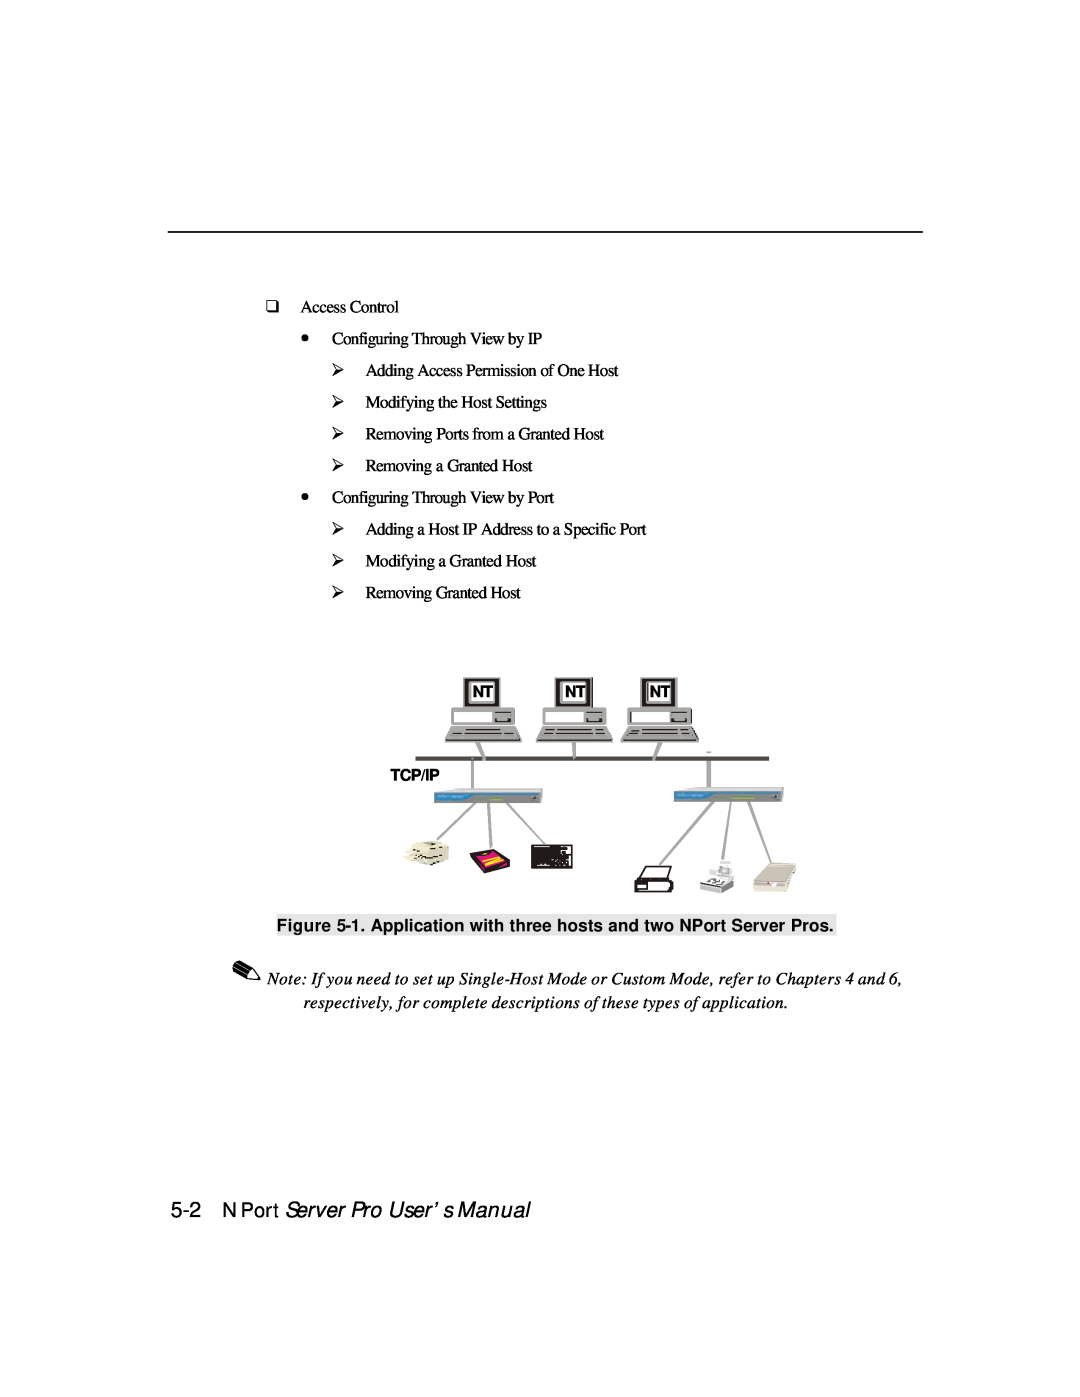 Moxa Technologies DE-303, DE-308 NPort Server Pro User’s Manual, 1. Application with three hosts and two NPort Server Pros 